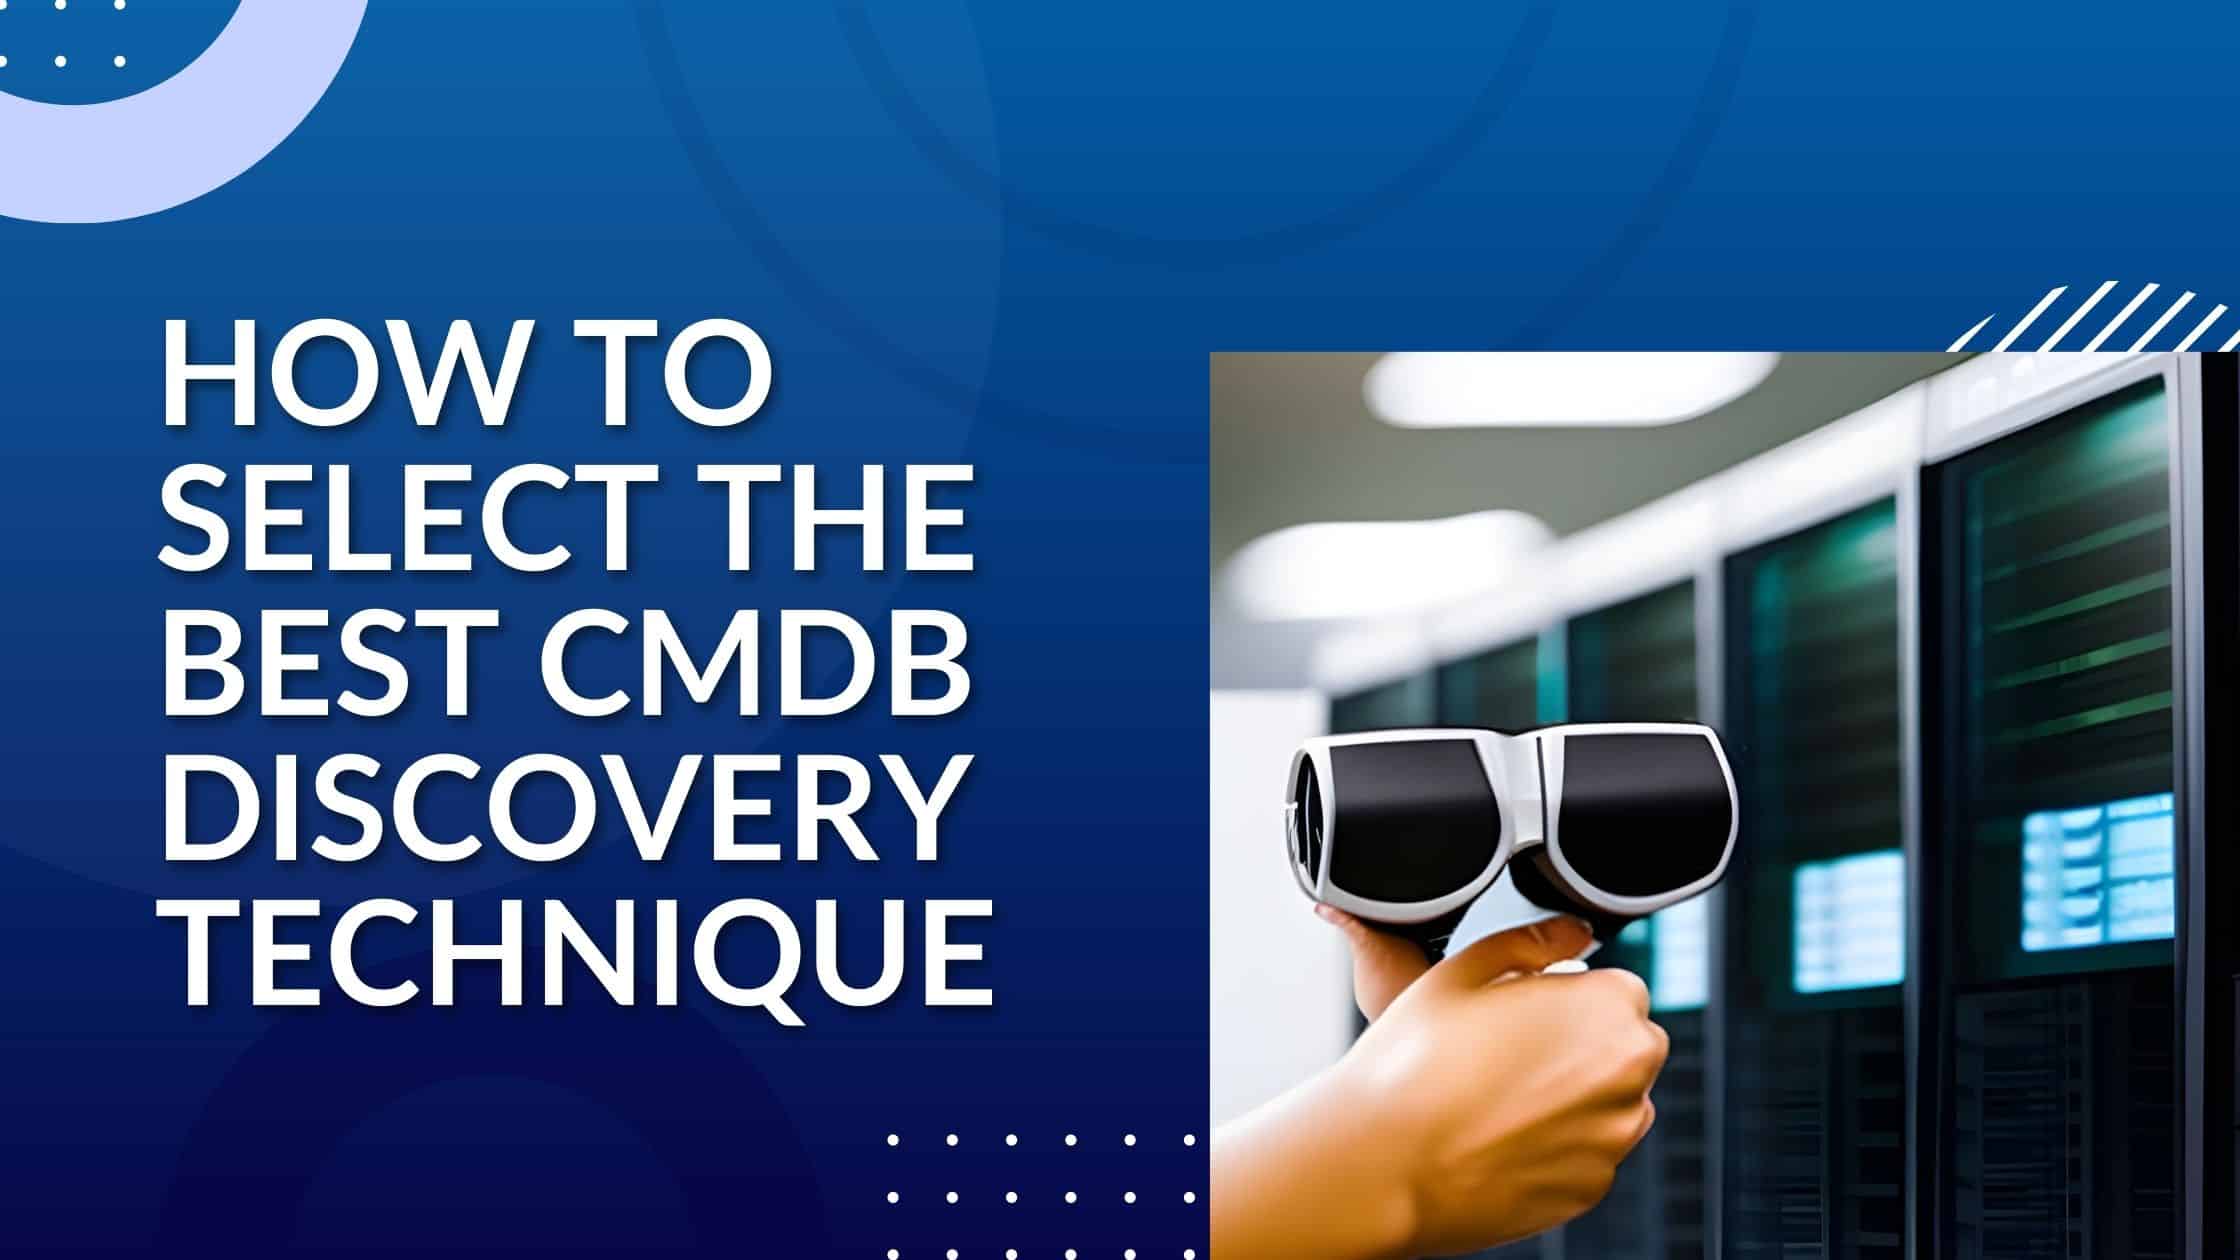 How to select the best CMDB discovery technique